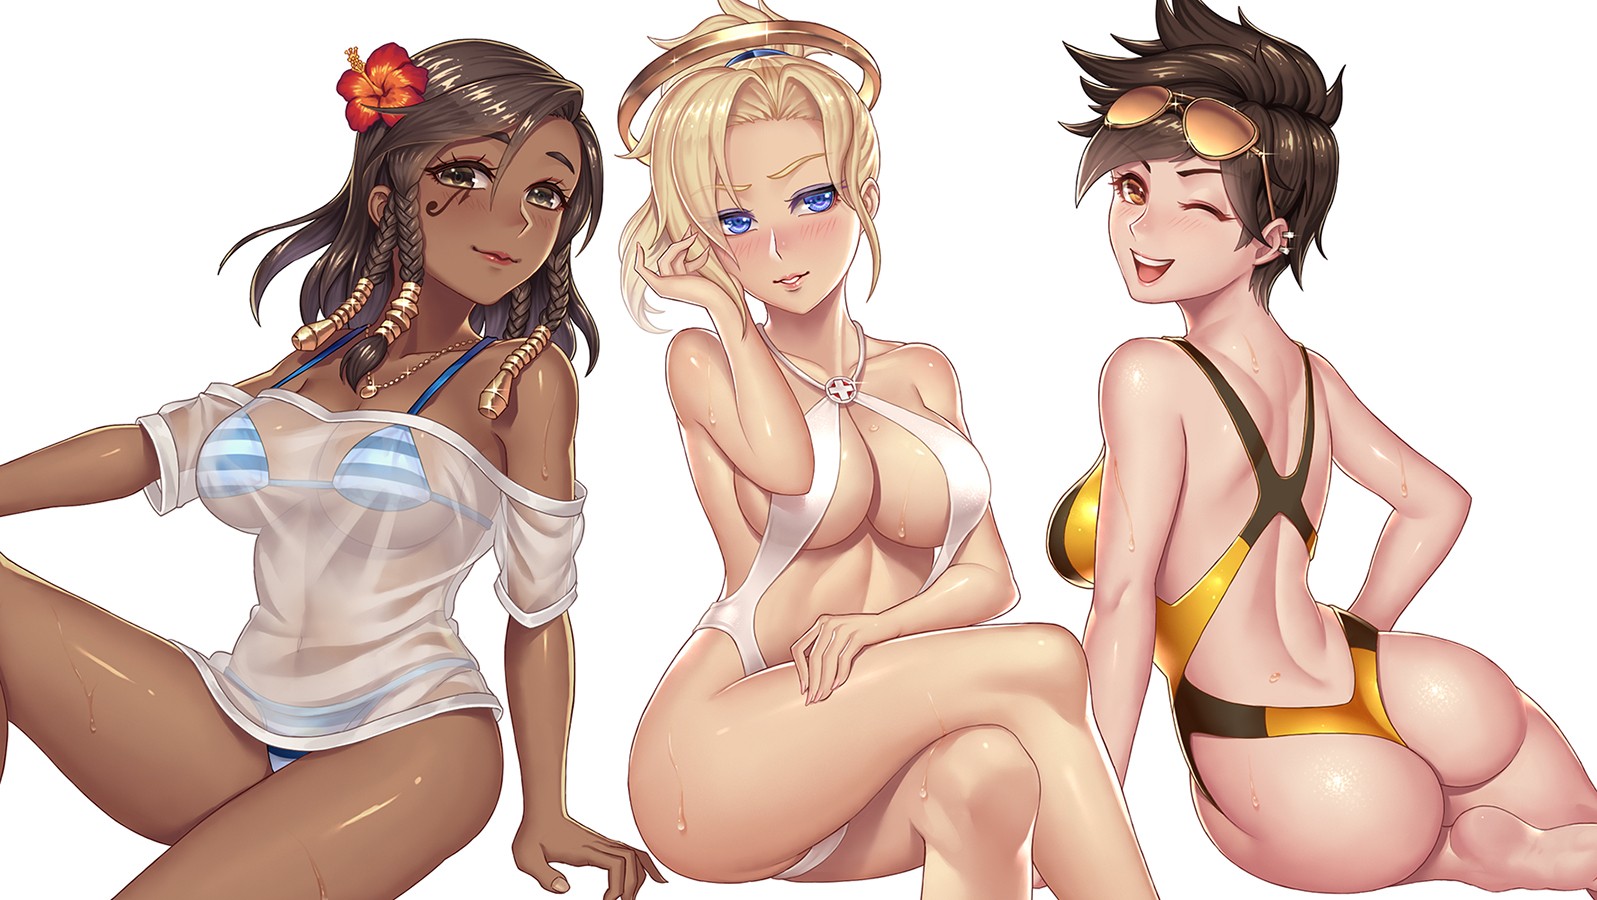 Anime 1597x900 Overwatch Mercy (Overwatch) Tracer (Overwatch) Pharah (Overwatch) ass bikini sling bikini tattoo wet clothing long hair blue eyes blonde brown eyes orange eyes women trio Pixiv boobs big boobs white background simple background women video game girls video game characters fan art curvy women with shades sunglasses thighs legs crossed one-piece swimsuit